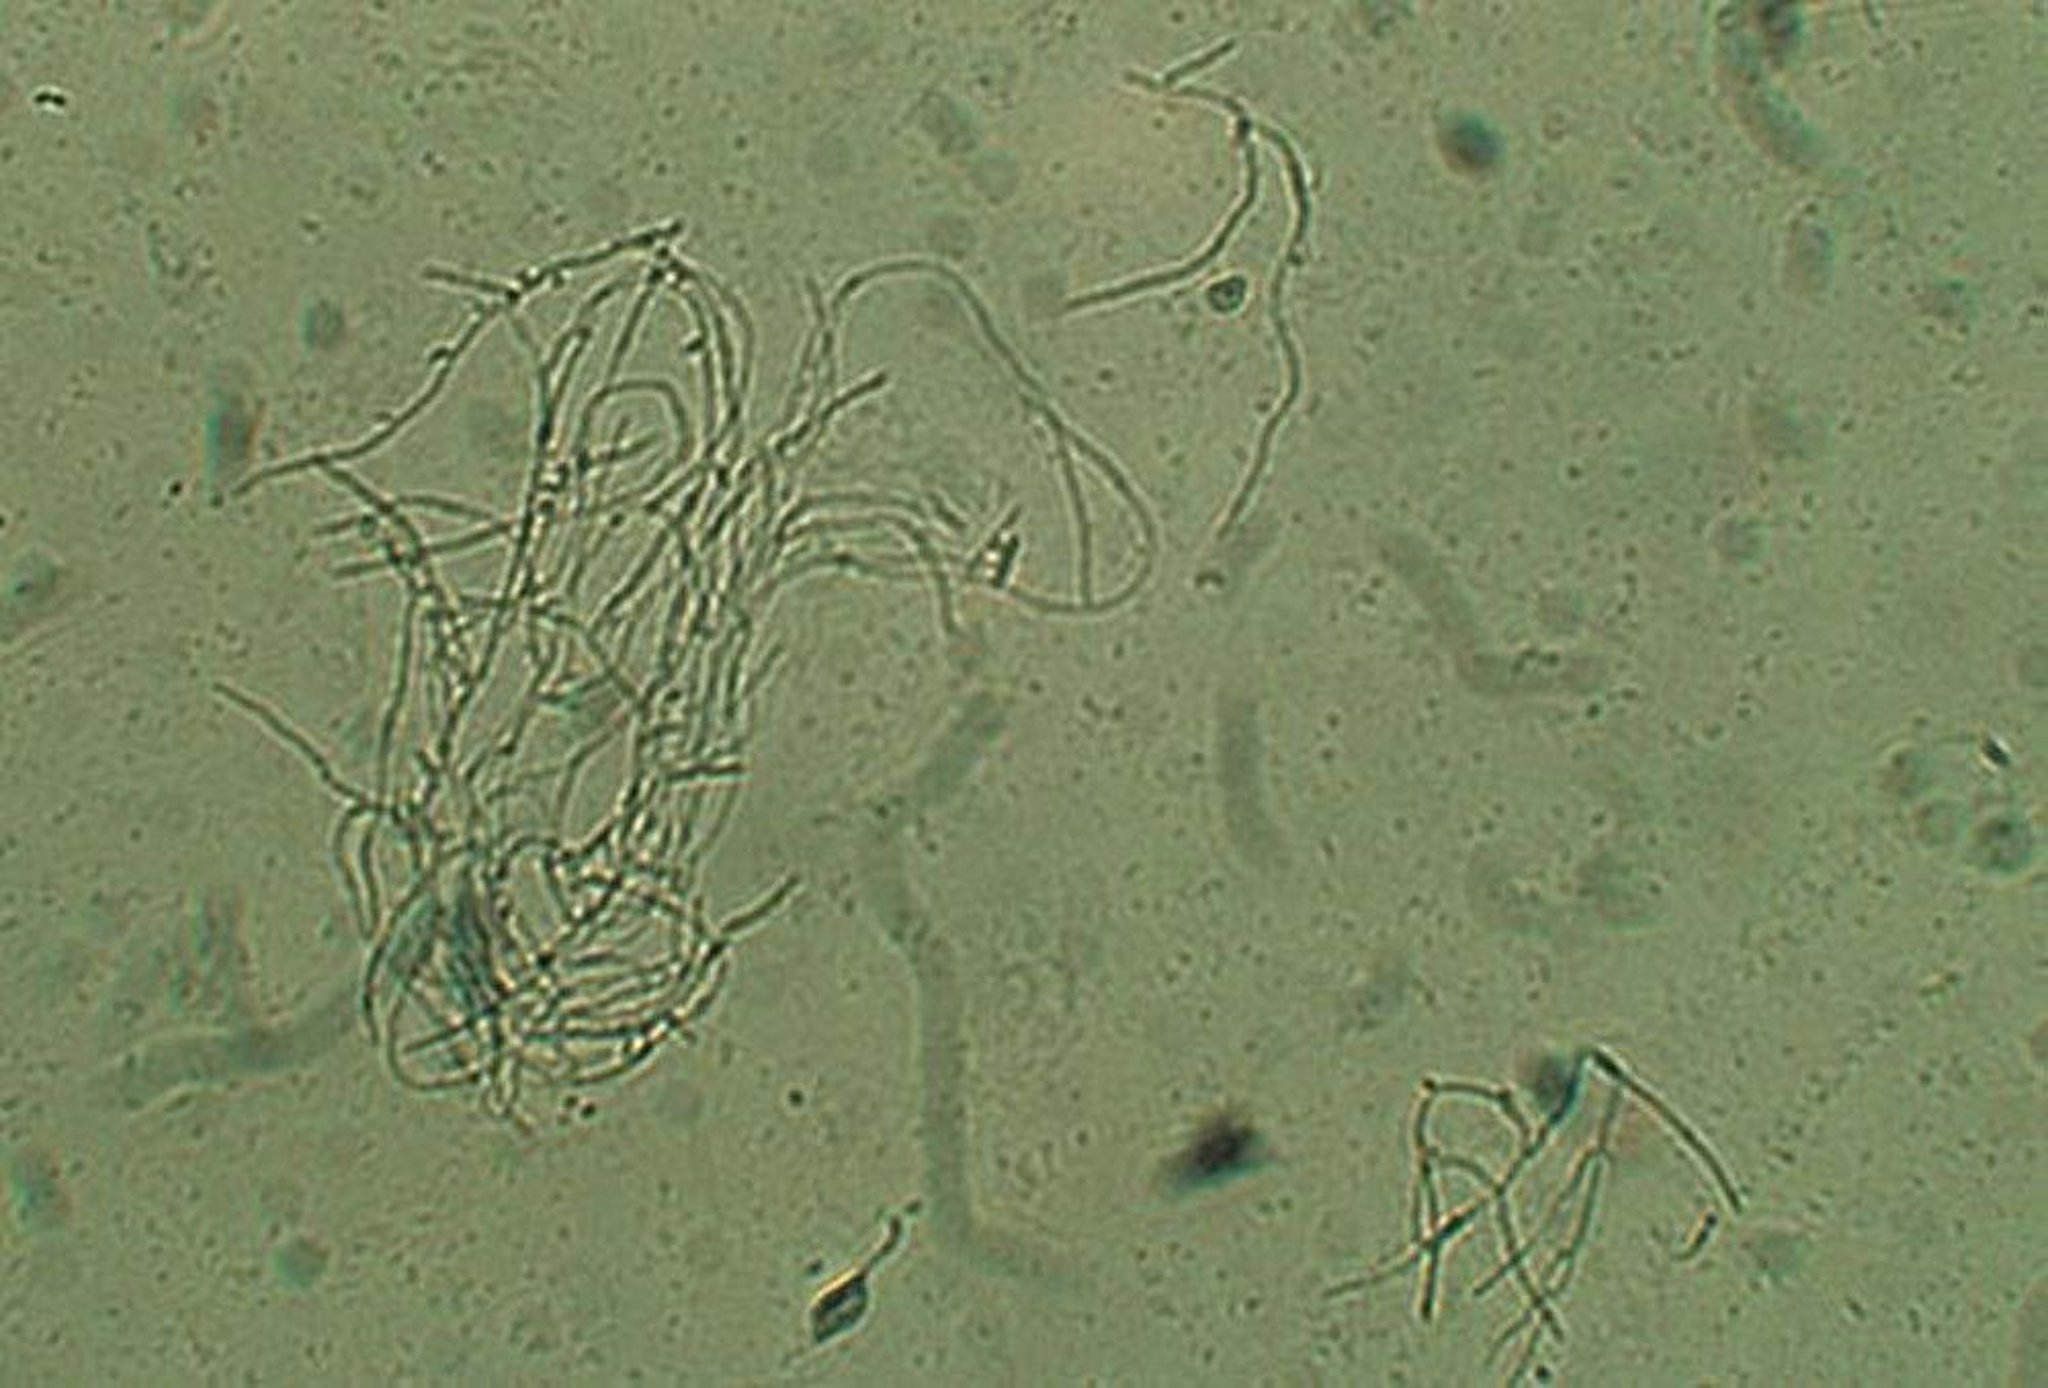 Hyphae and Spores in Candidal Vaginitis